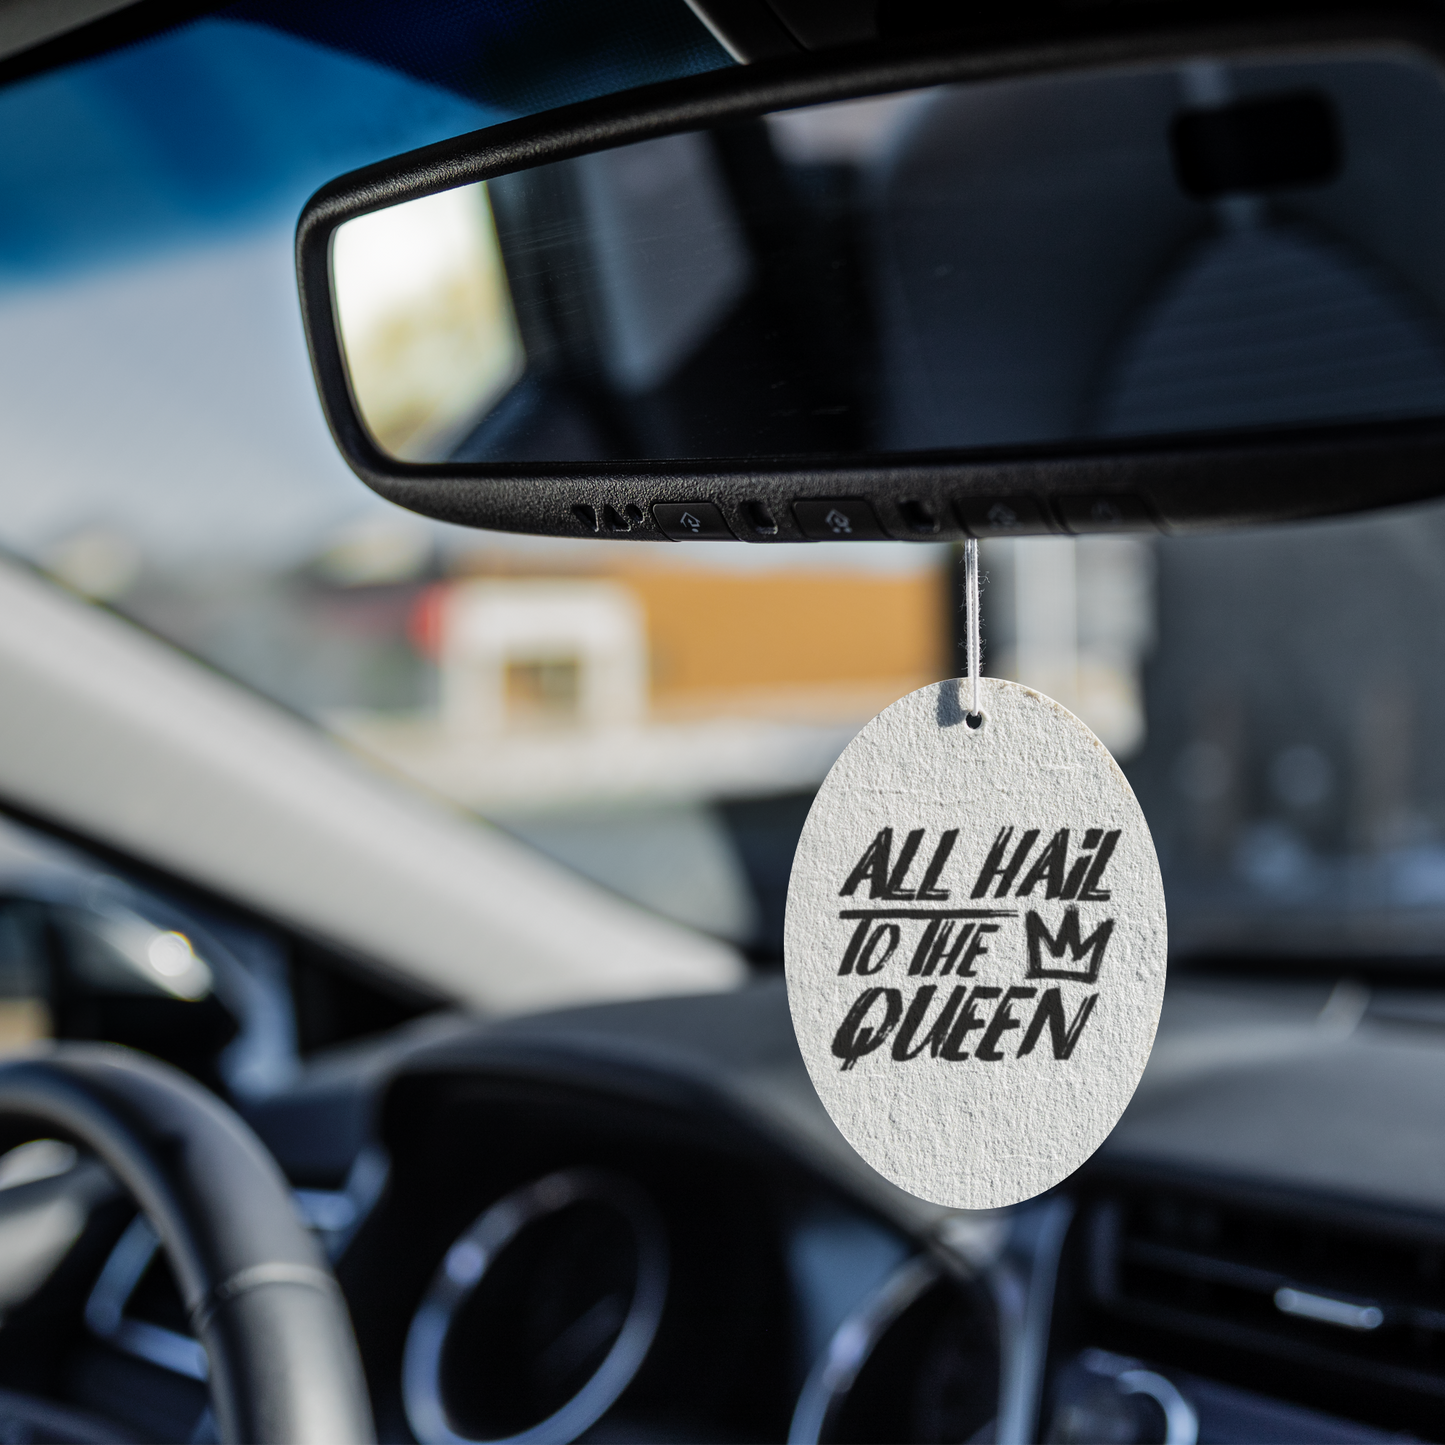 ALL HAIL TO THE QUEEN AIR FRESHENER 3 PACK